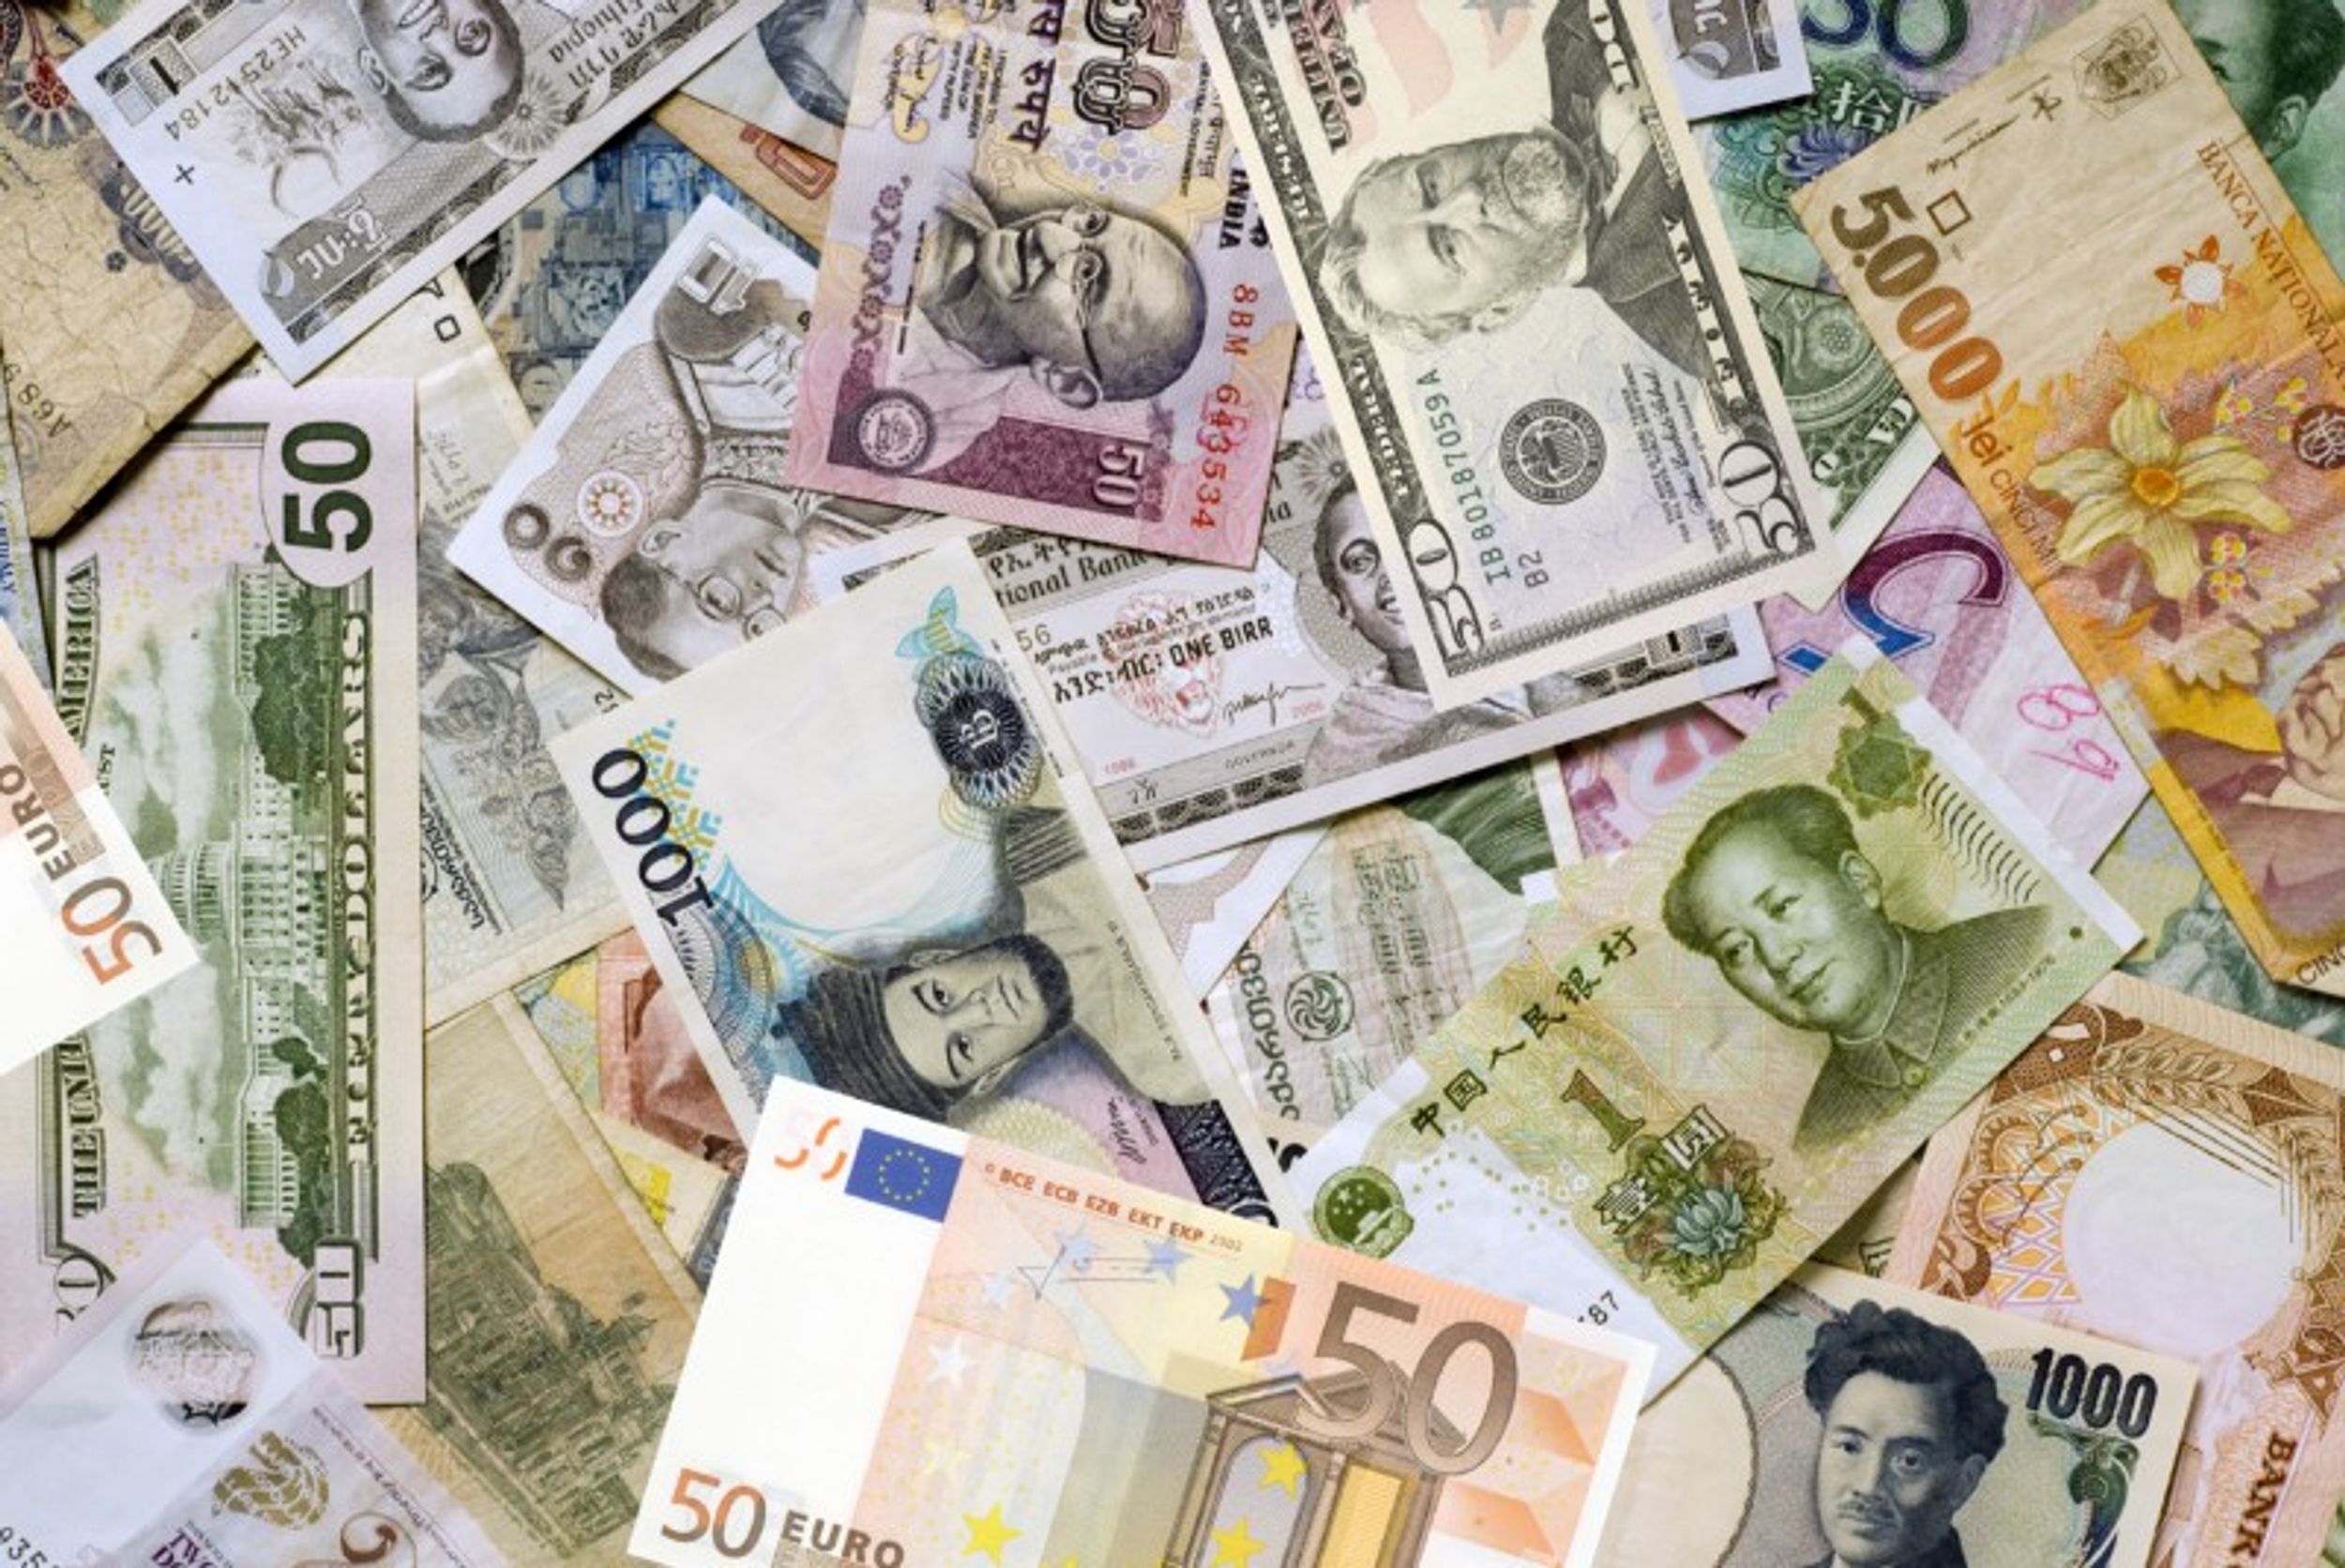 CURRENCIES GET CRUSHED ACROSS THE WORLD